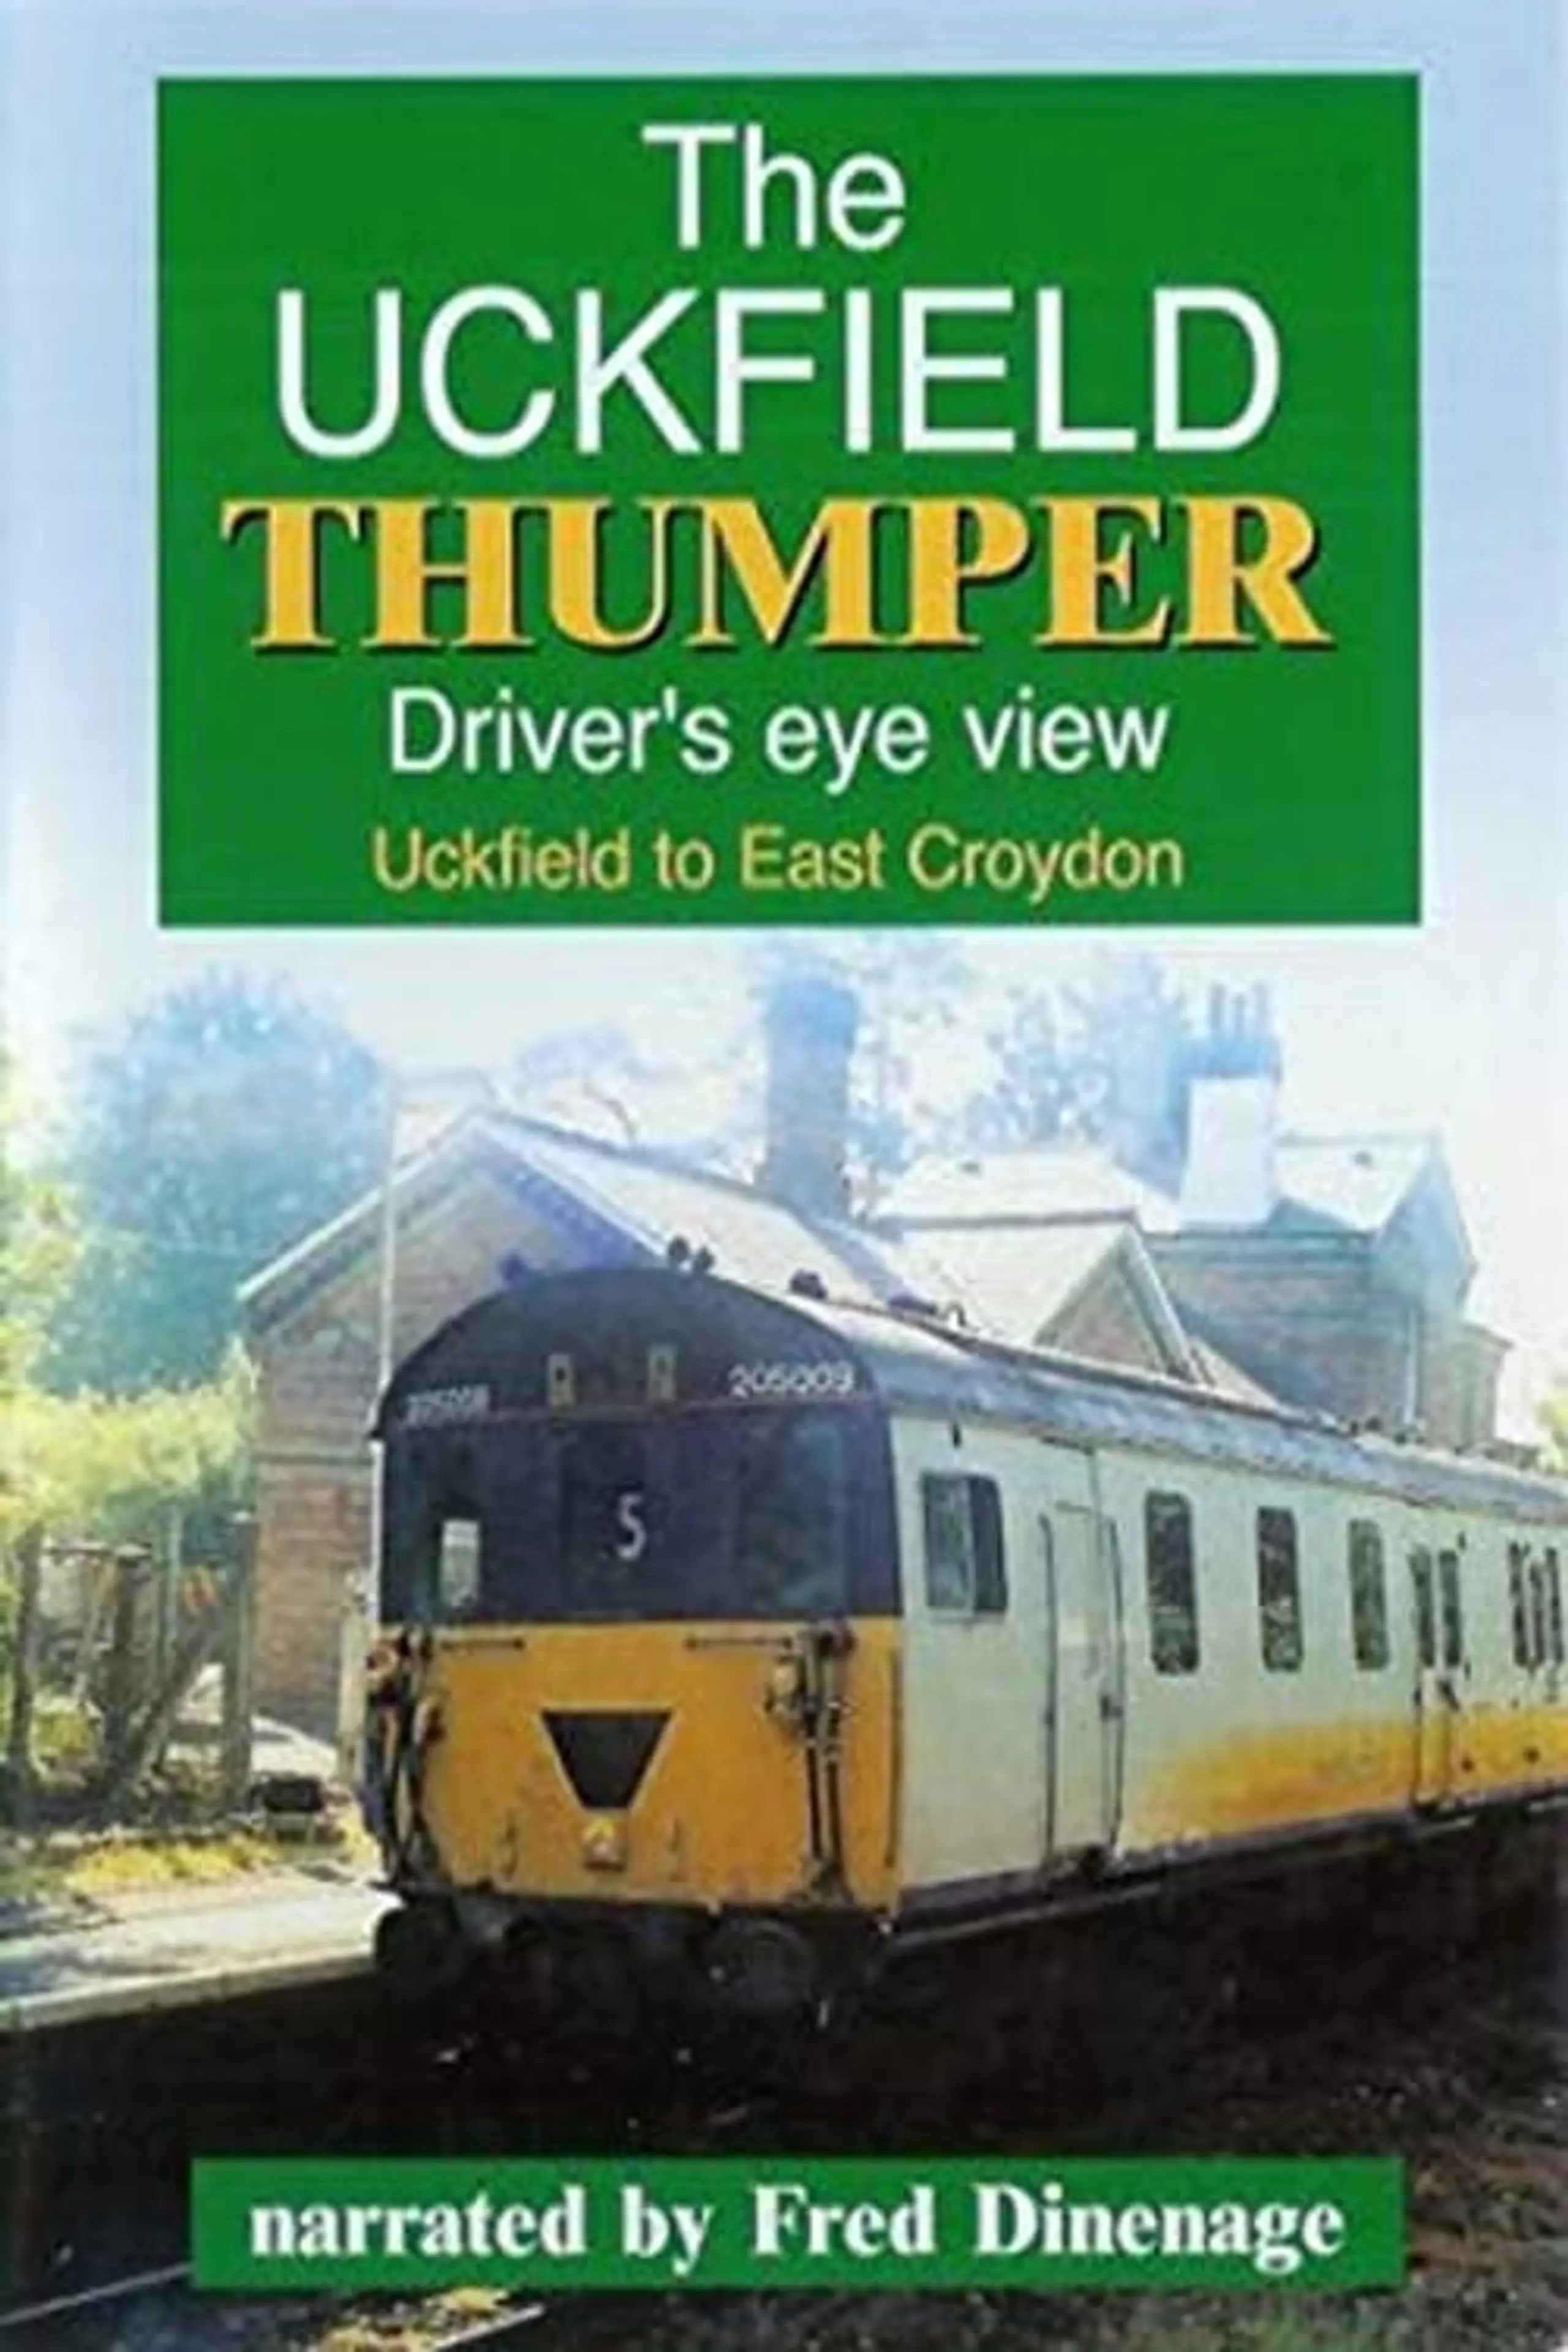 The Uckfield Thumper